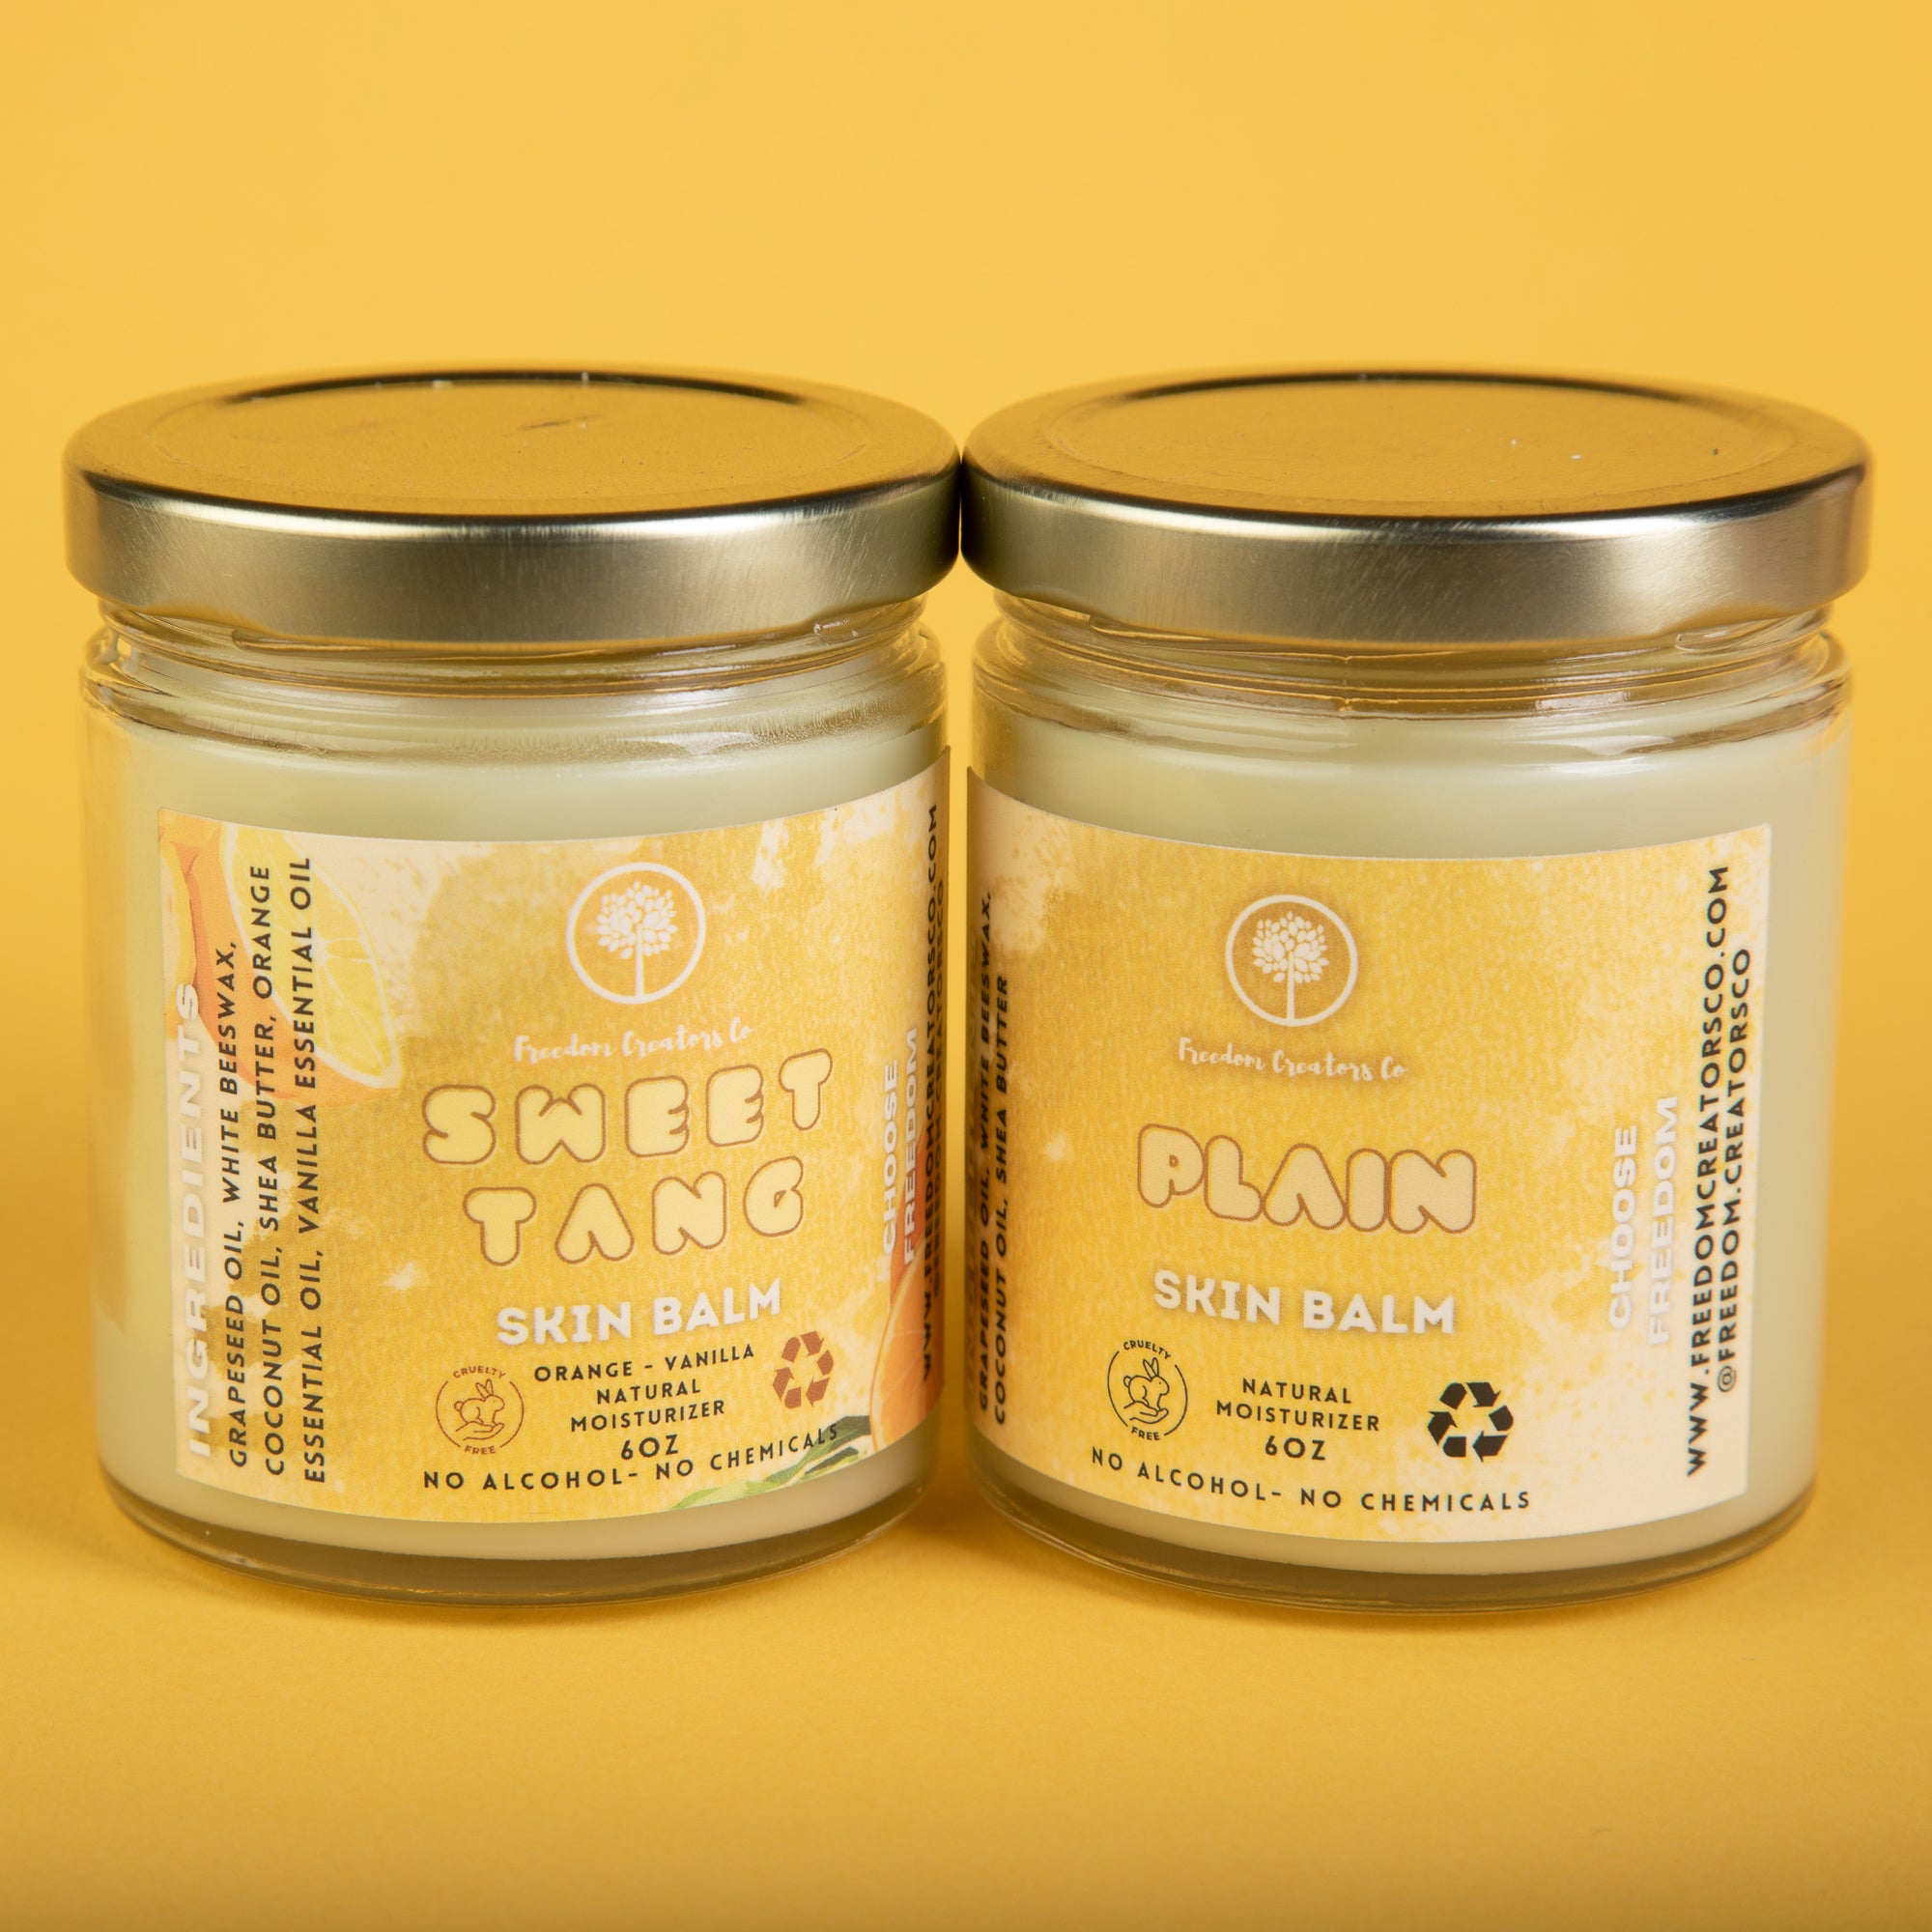 Plain and Orange Vanilla Sweet Tang Skin Balm for face and body